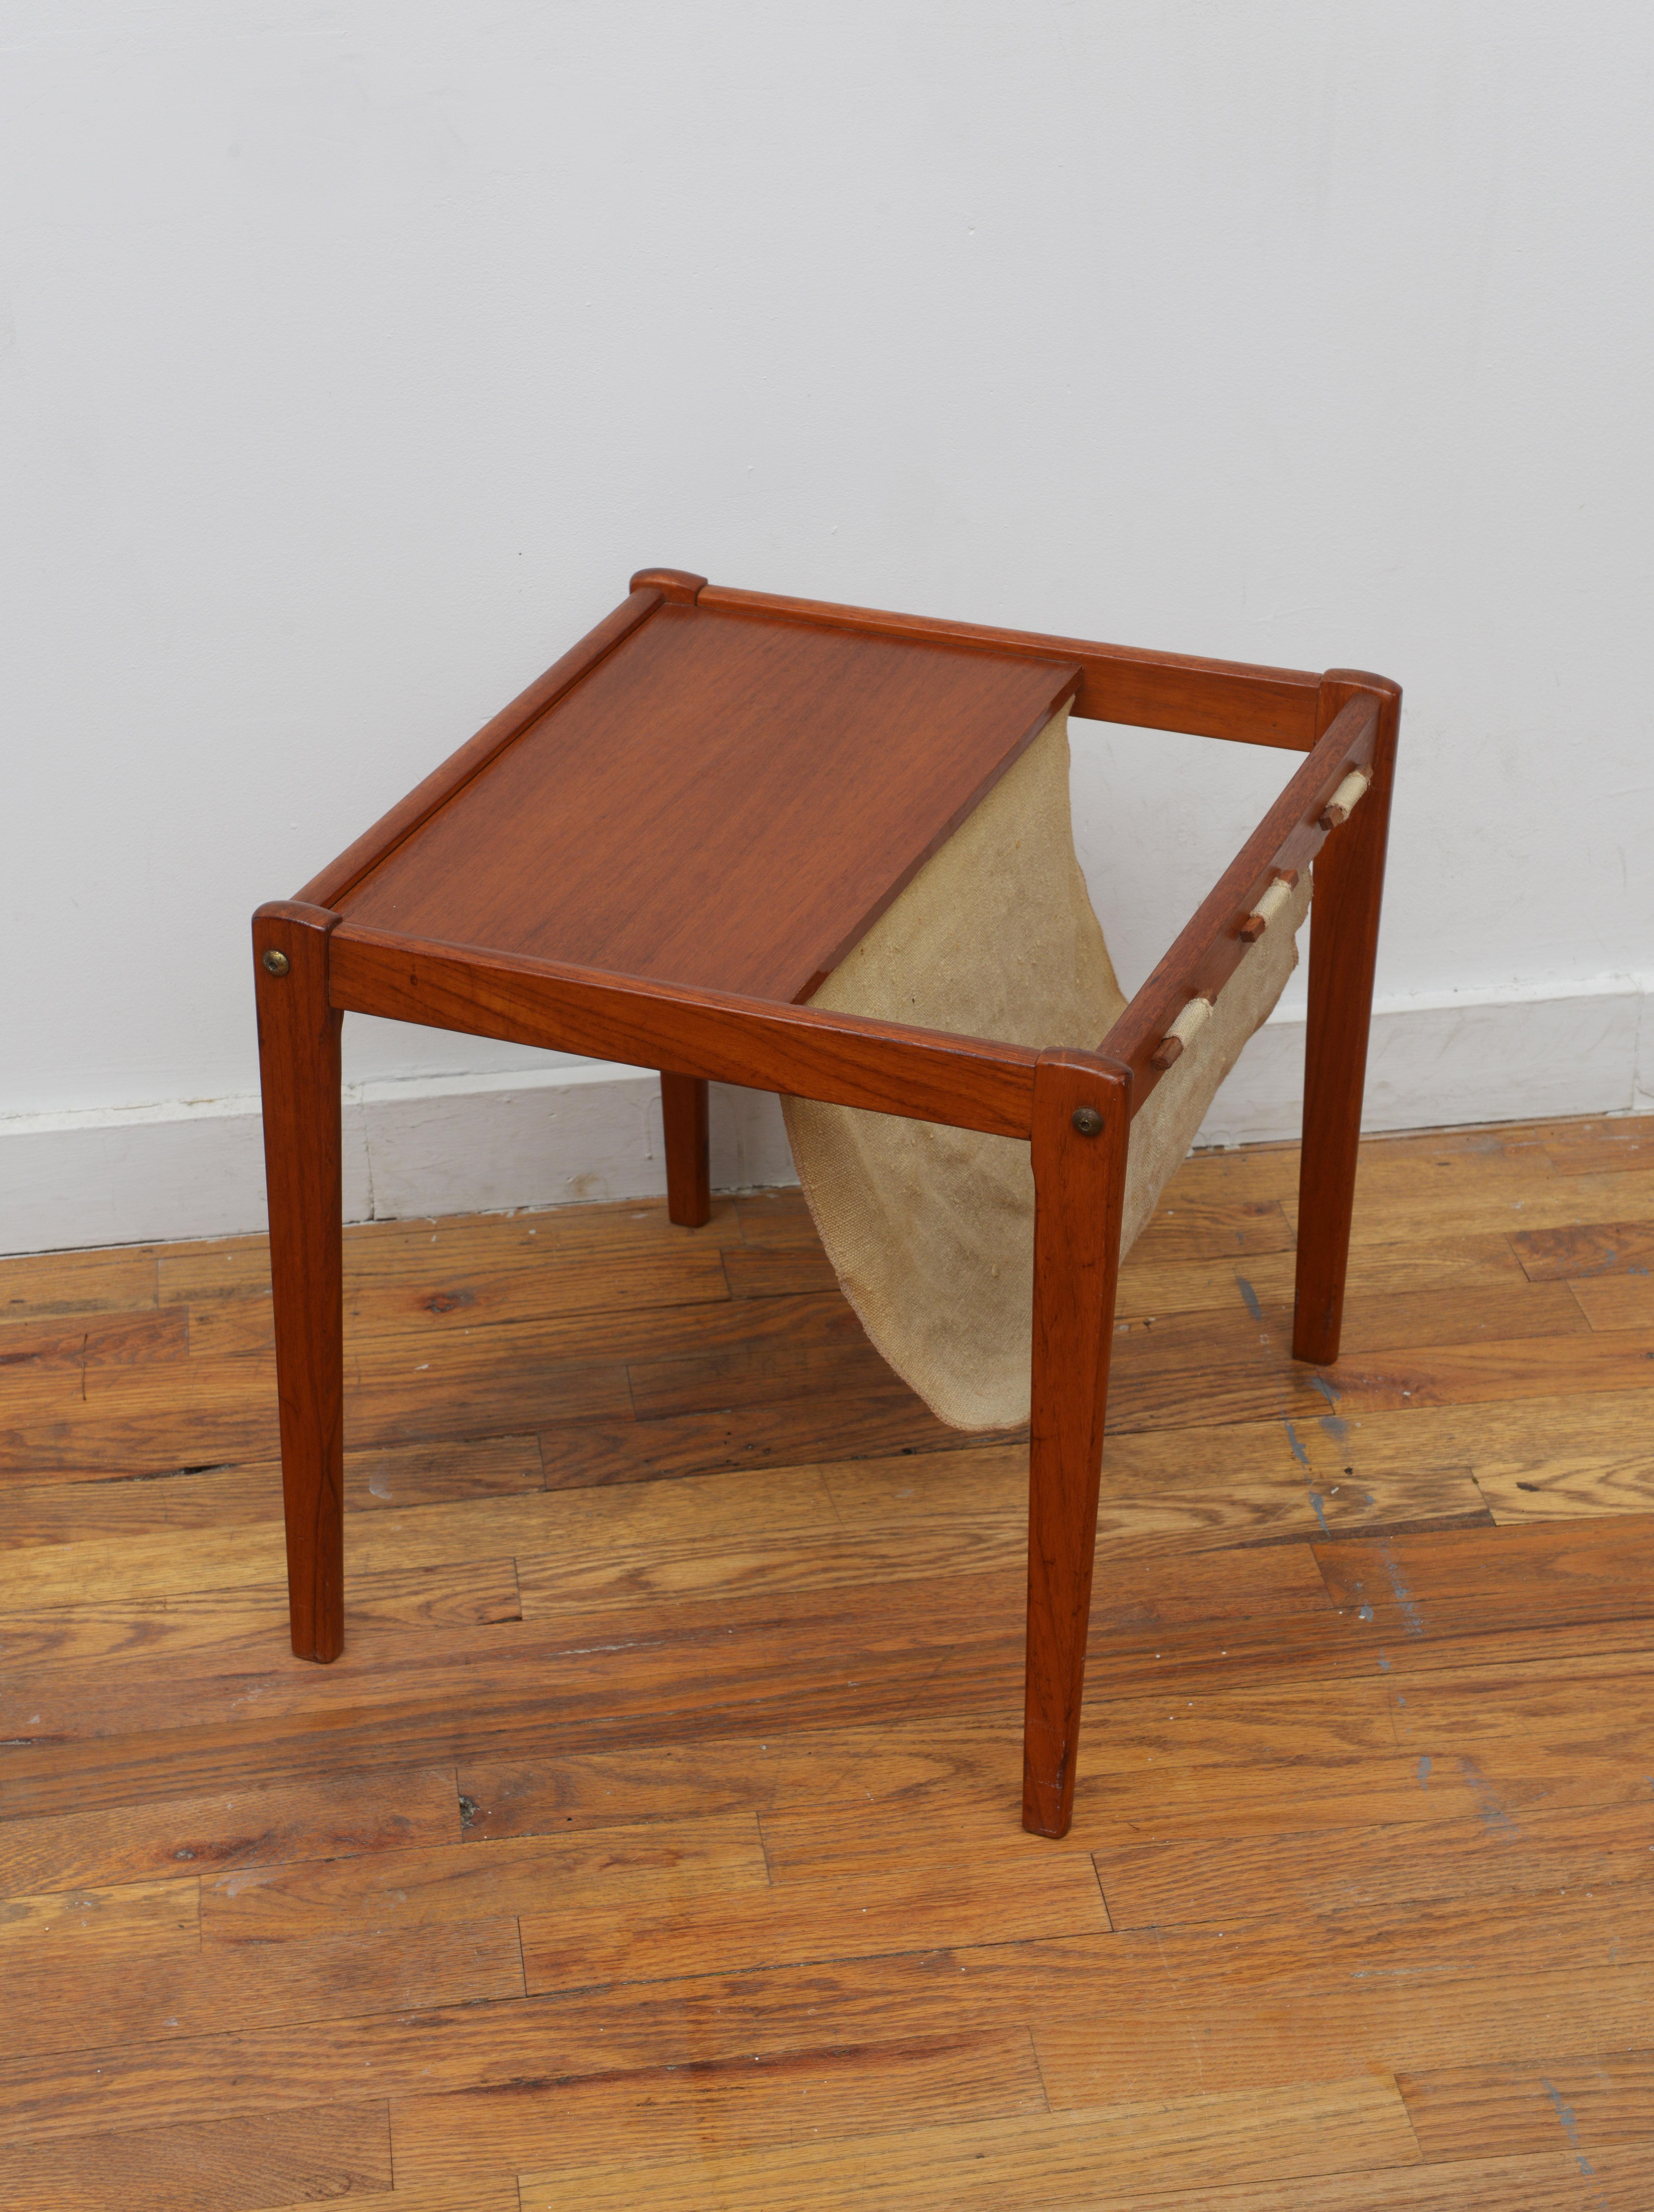 Beautiful teak Danish Modern Brdr Furbo teak end table with fabric sling magazine rack 1970s (Signed). This  vintage table is the perfect way to store your magazine collection while being a great accent to any room!